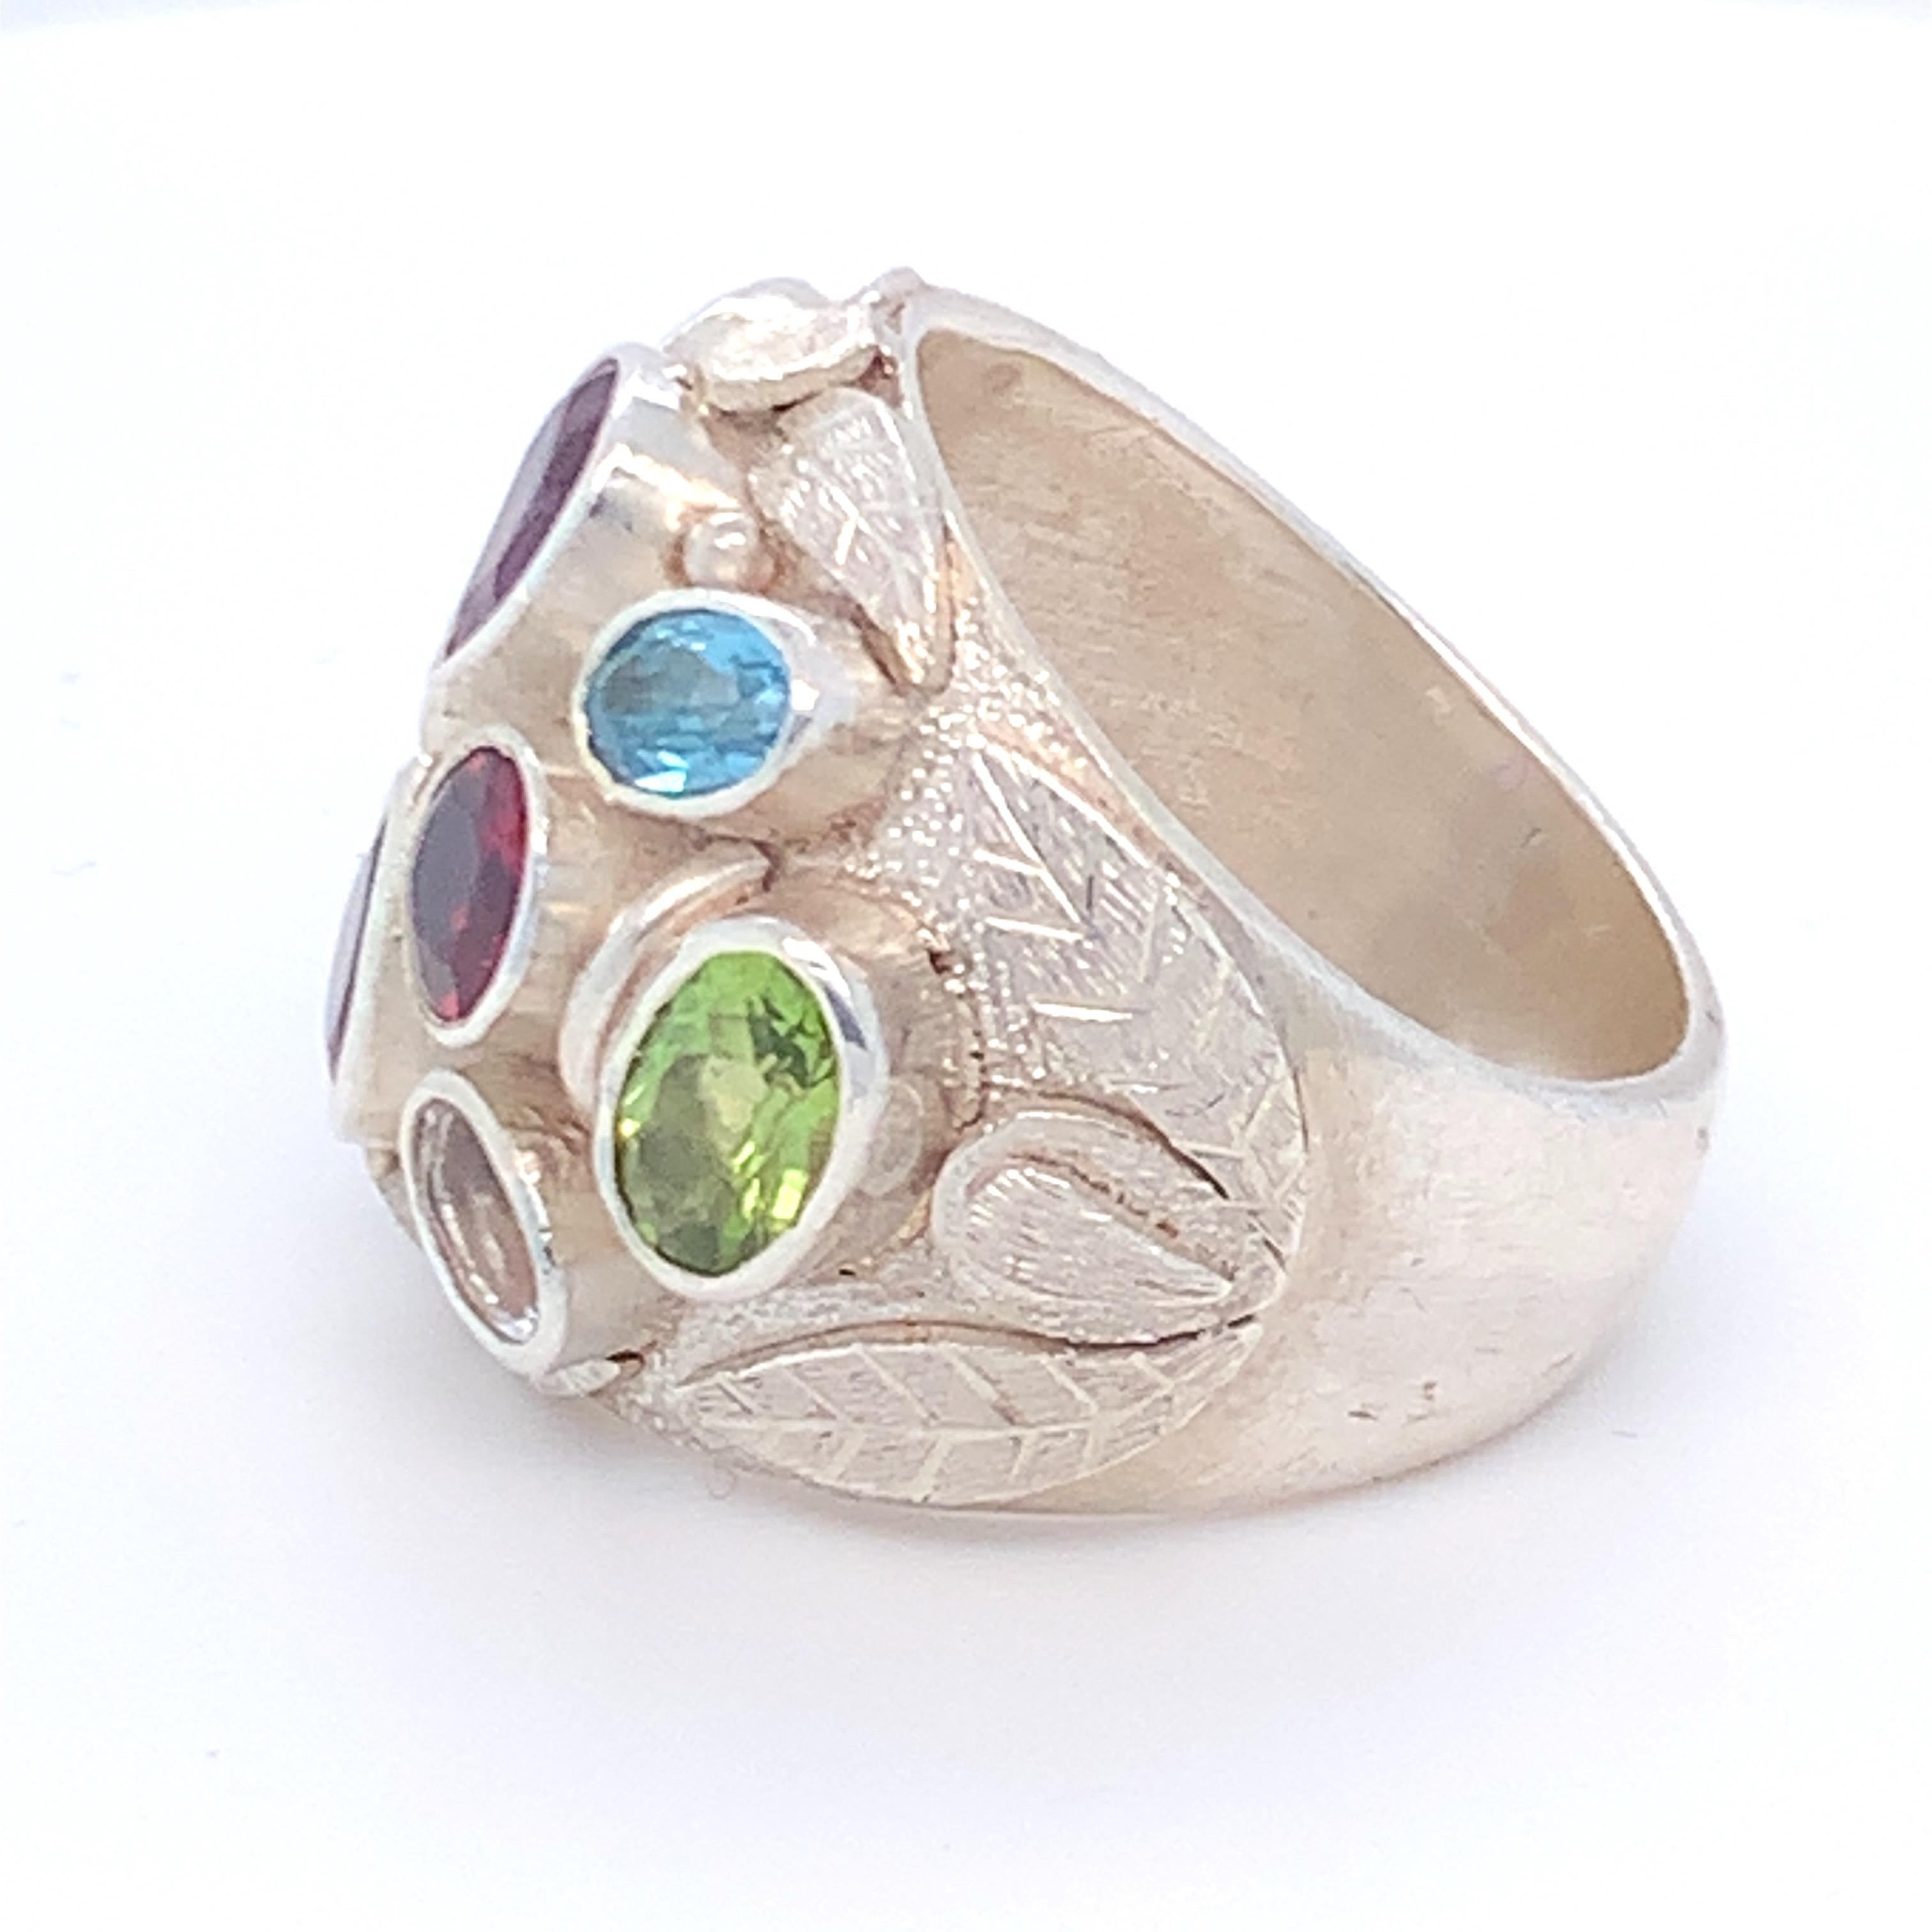 This multi gem cocktail ring is set in sterling silver. Carefully selected amethyst, peridot, blue topaz, crystal and garnet are used on this  handcrafted stunning piece of jewelry.
Approximate Size:
Multi gem: 7.00ct